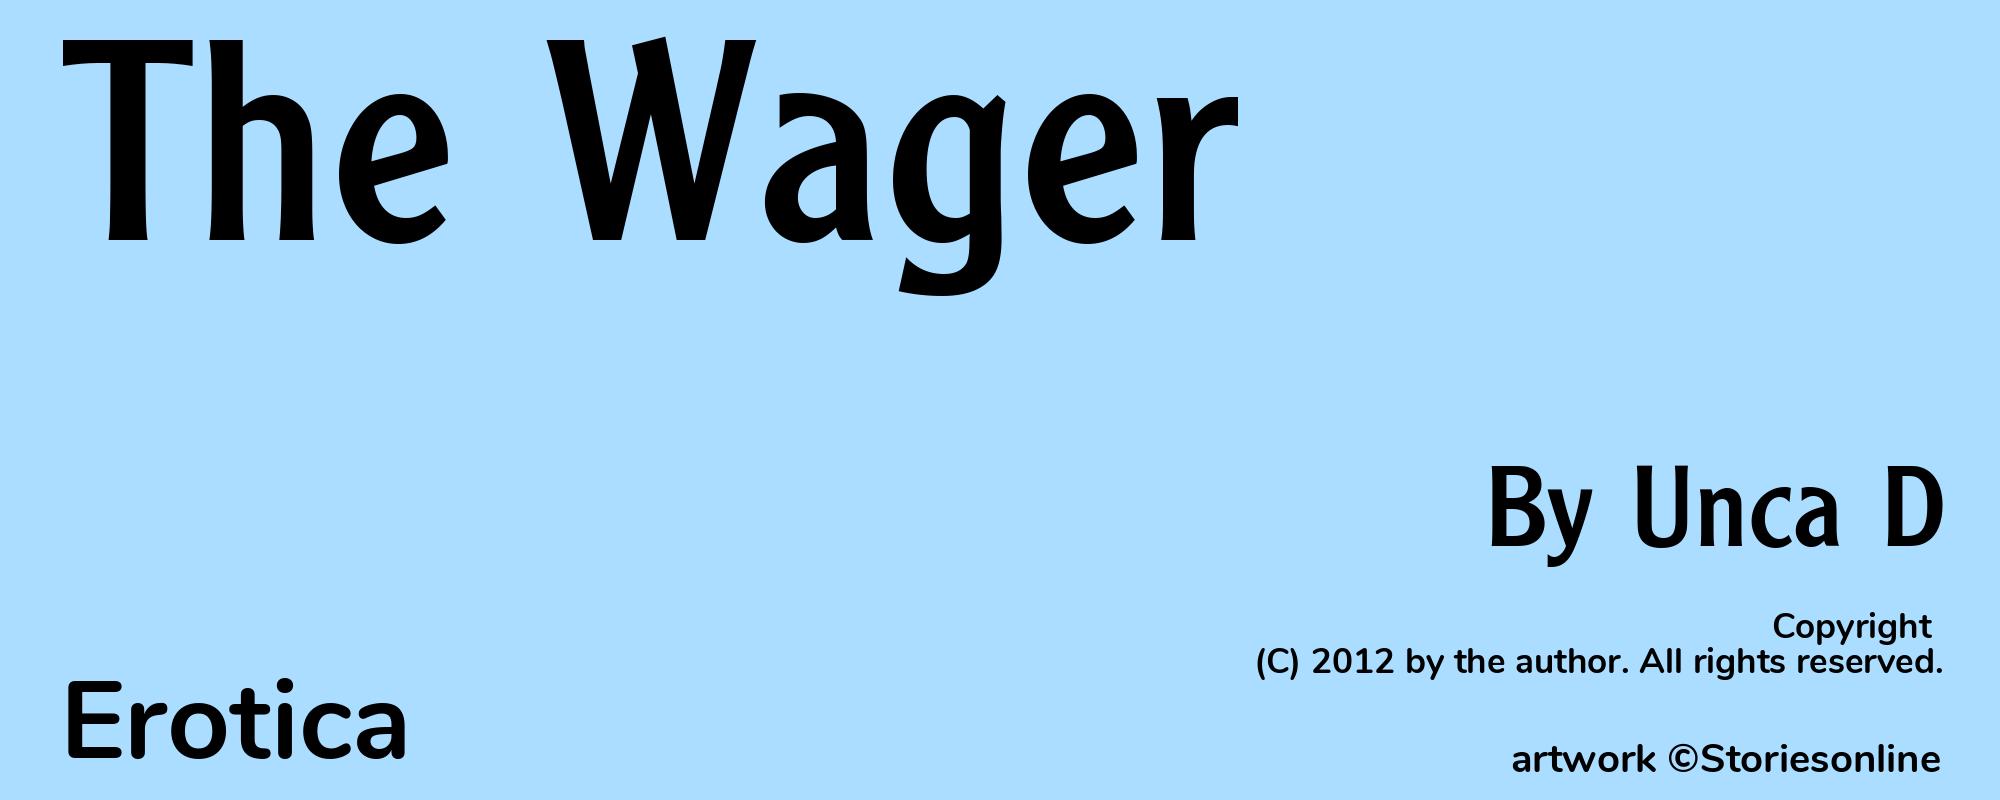 The Wager - Cover